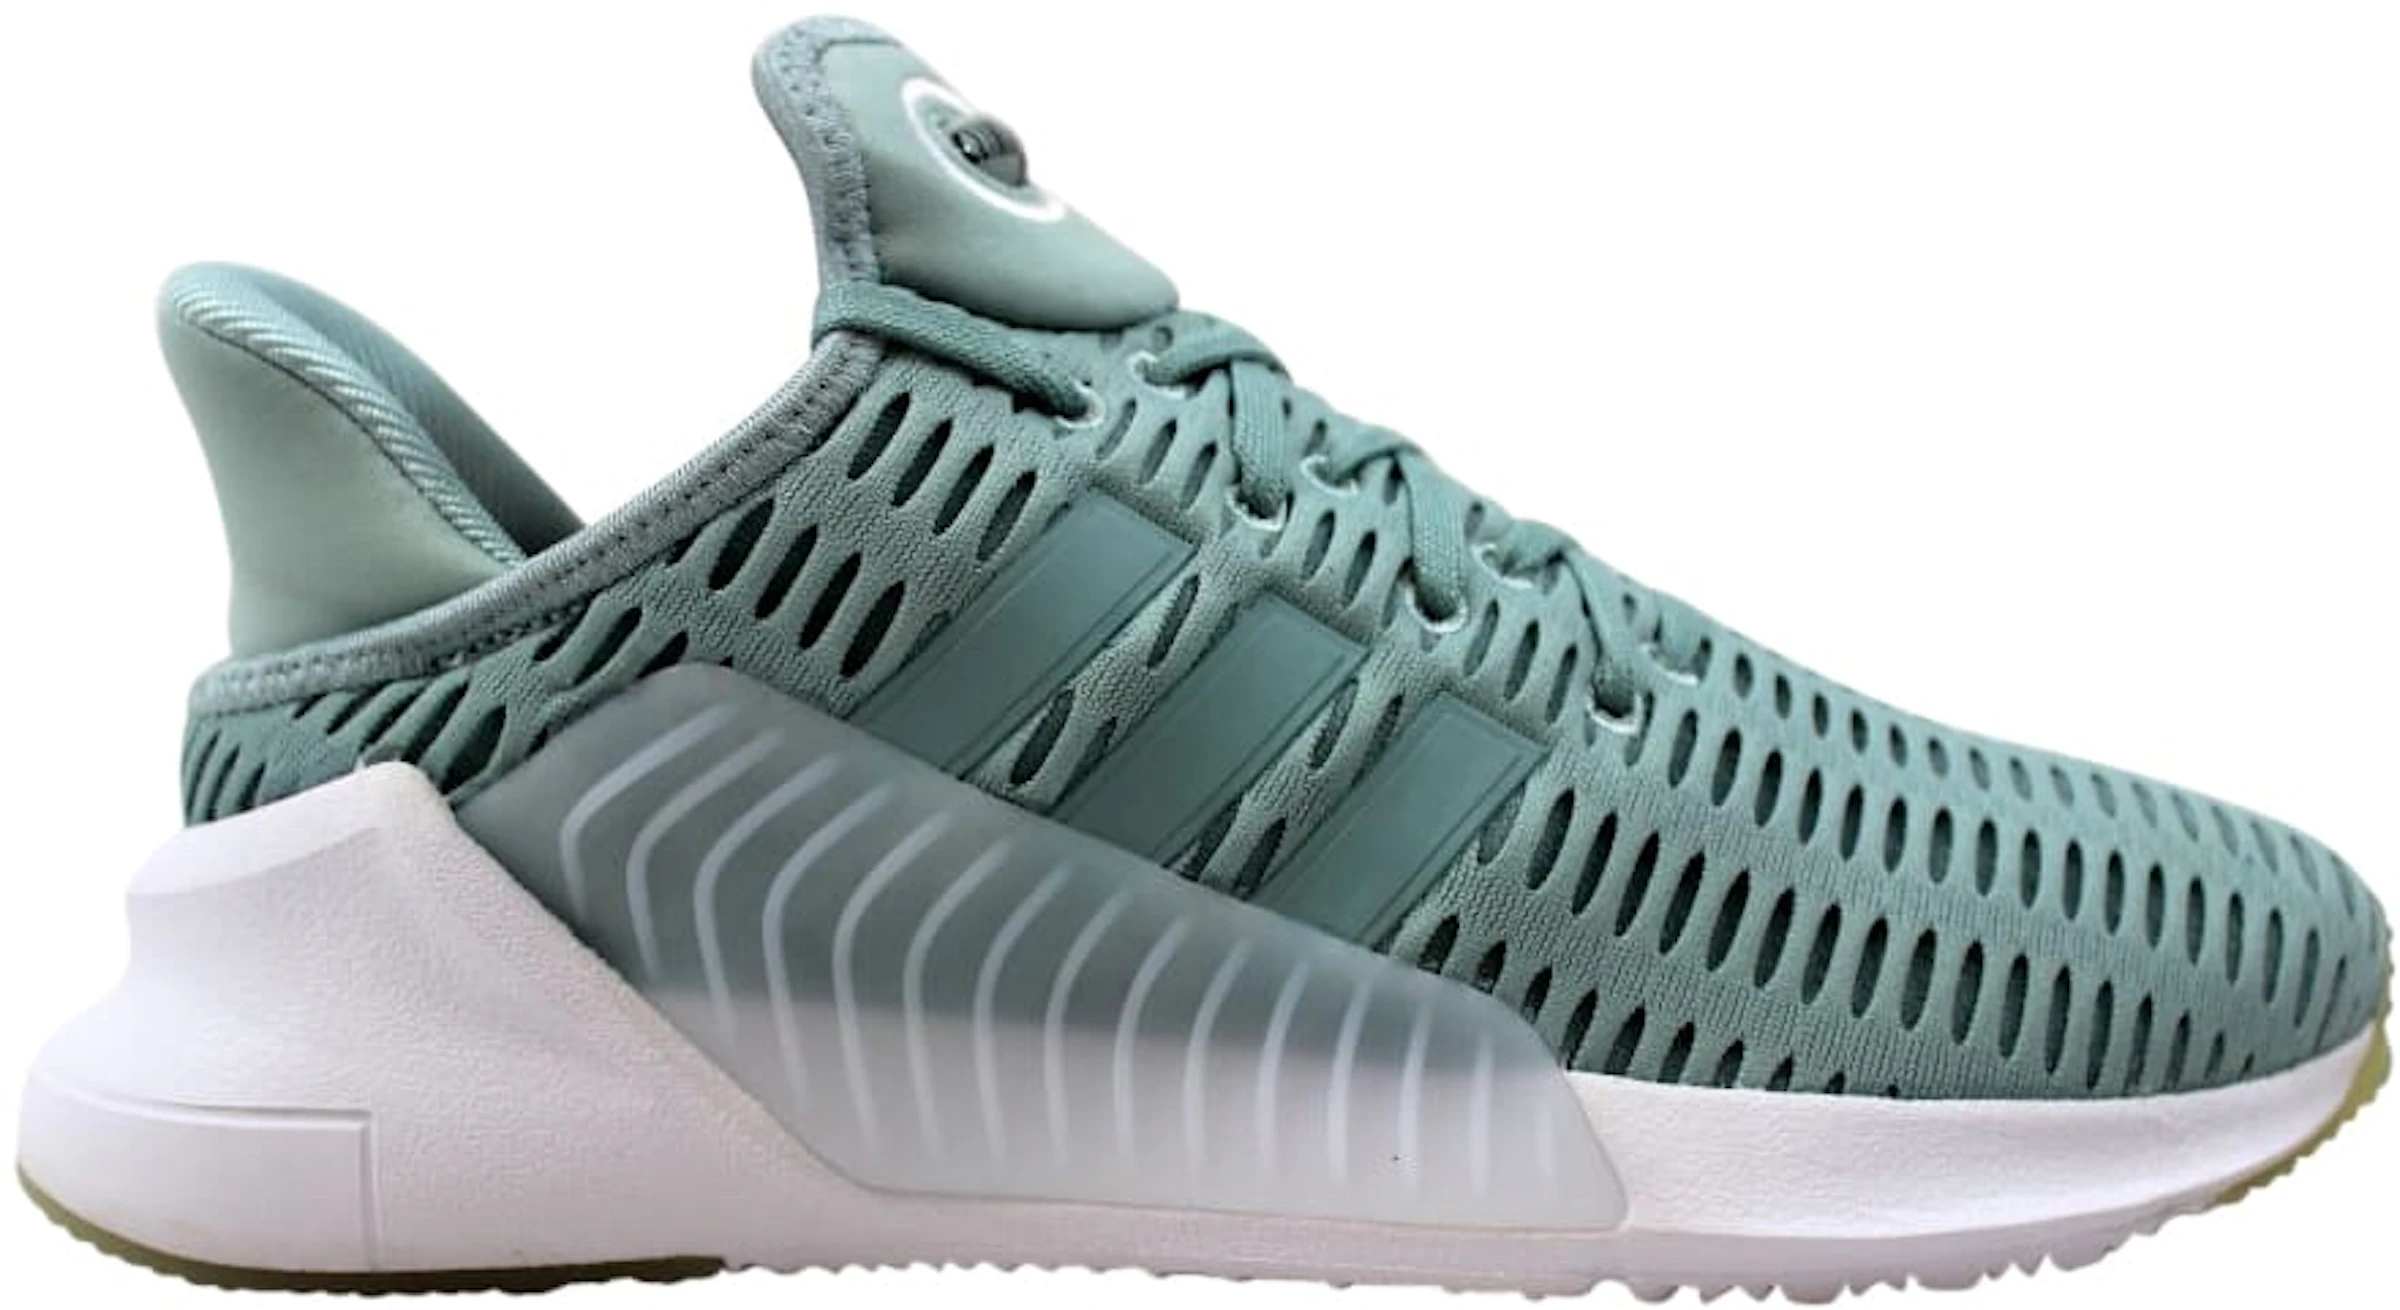 adidas Climacool 02/17 W Tactile Green (W) - BY9293 ES